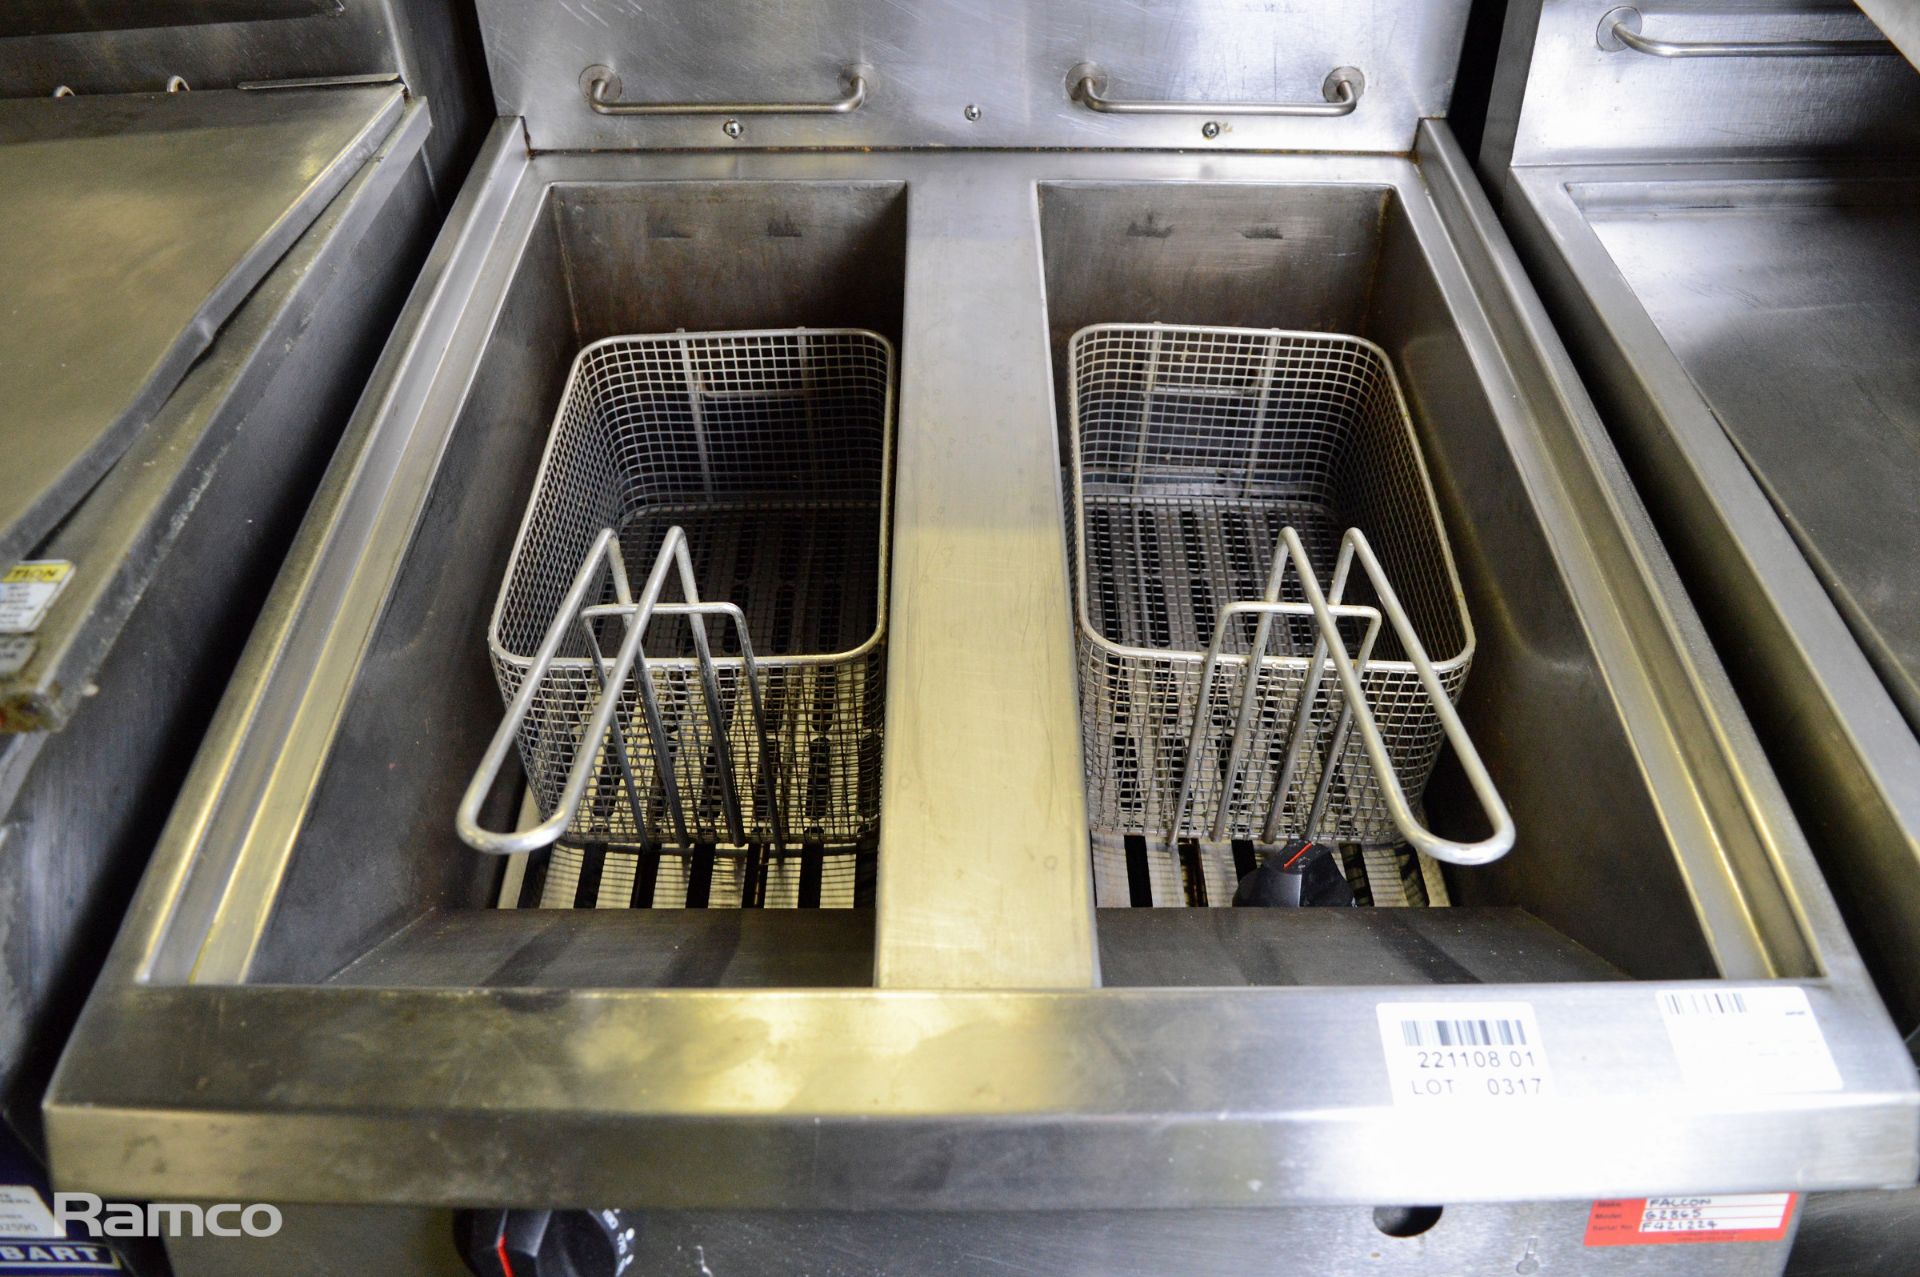 Falcon Dominator G2865 free standing twin basket gas fryer - missing 1 control knob - Image 5 of 6